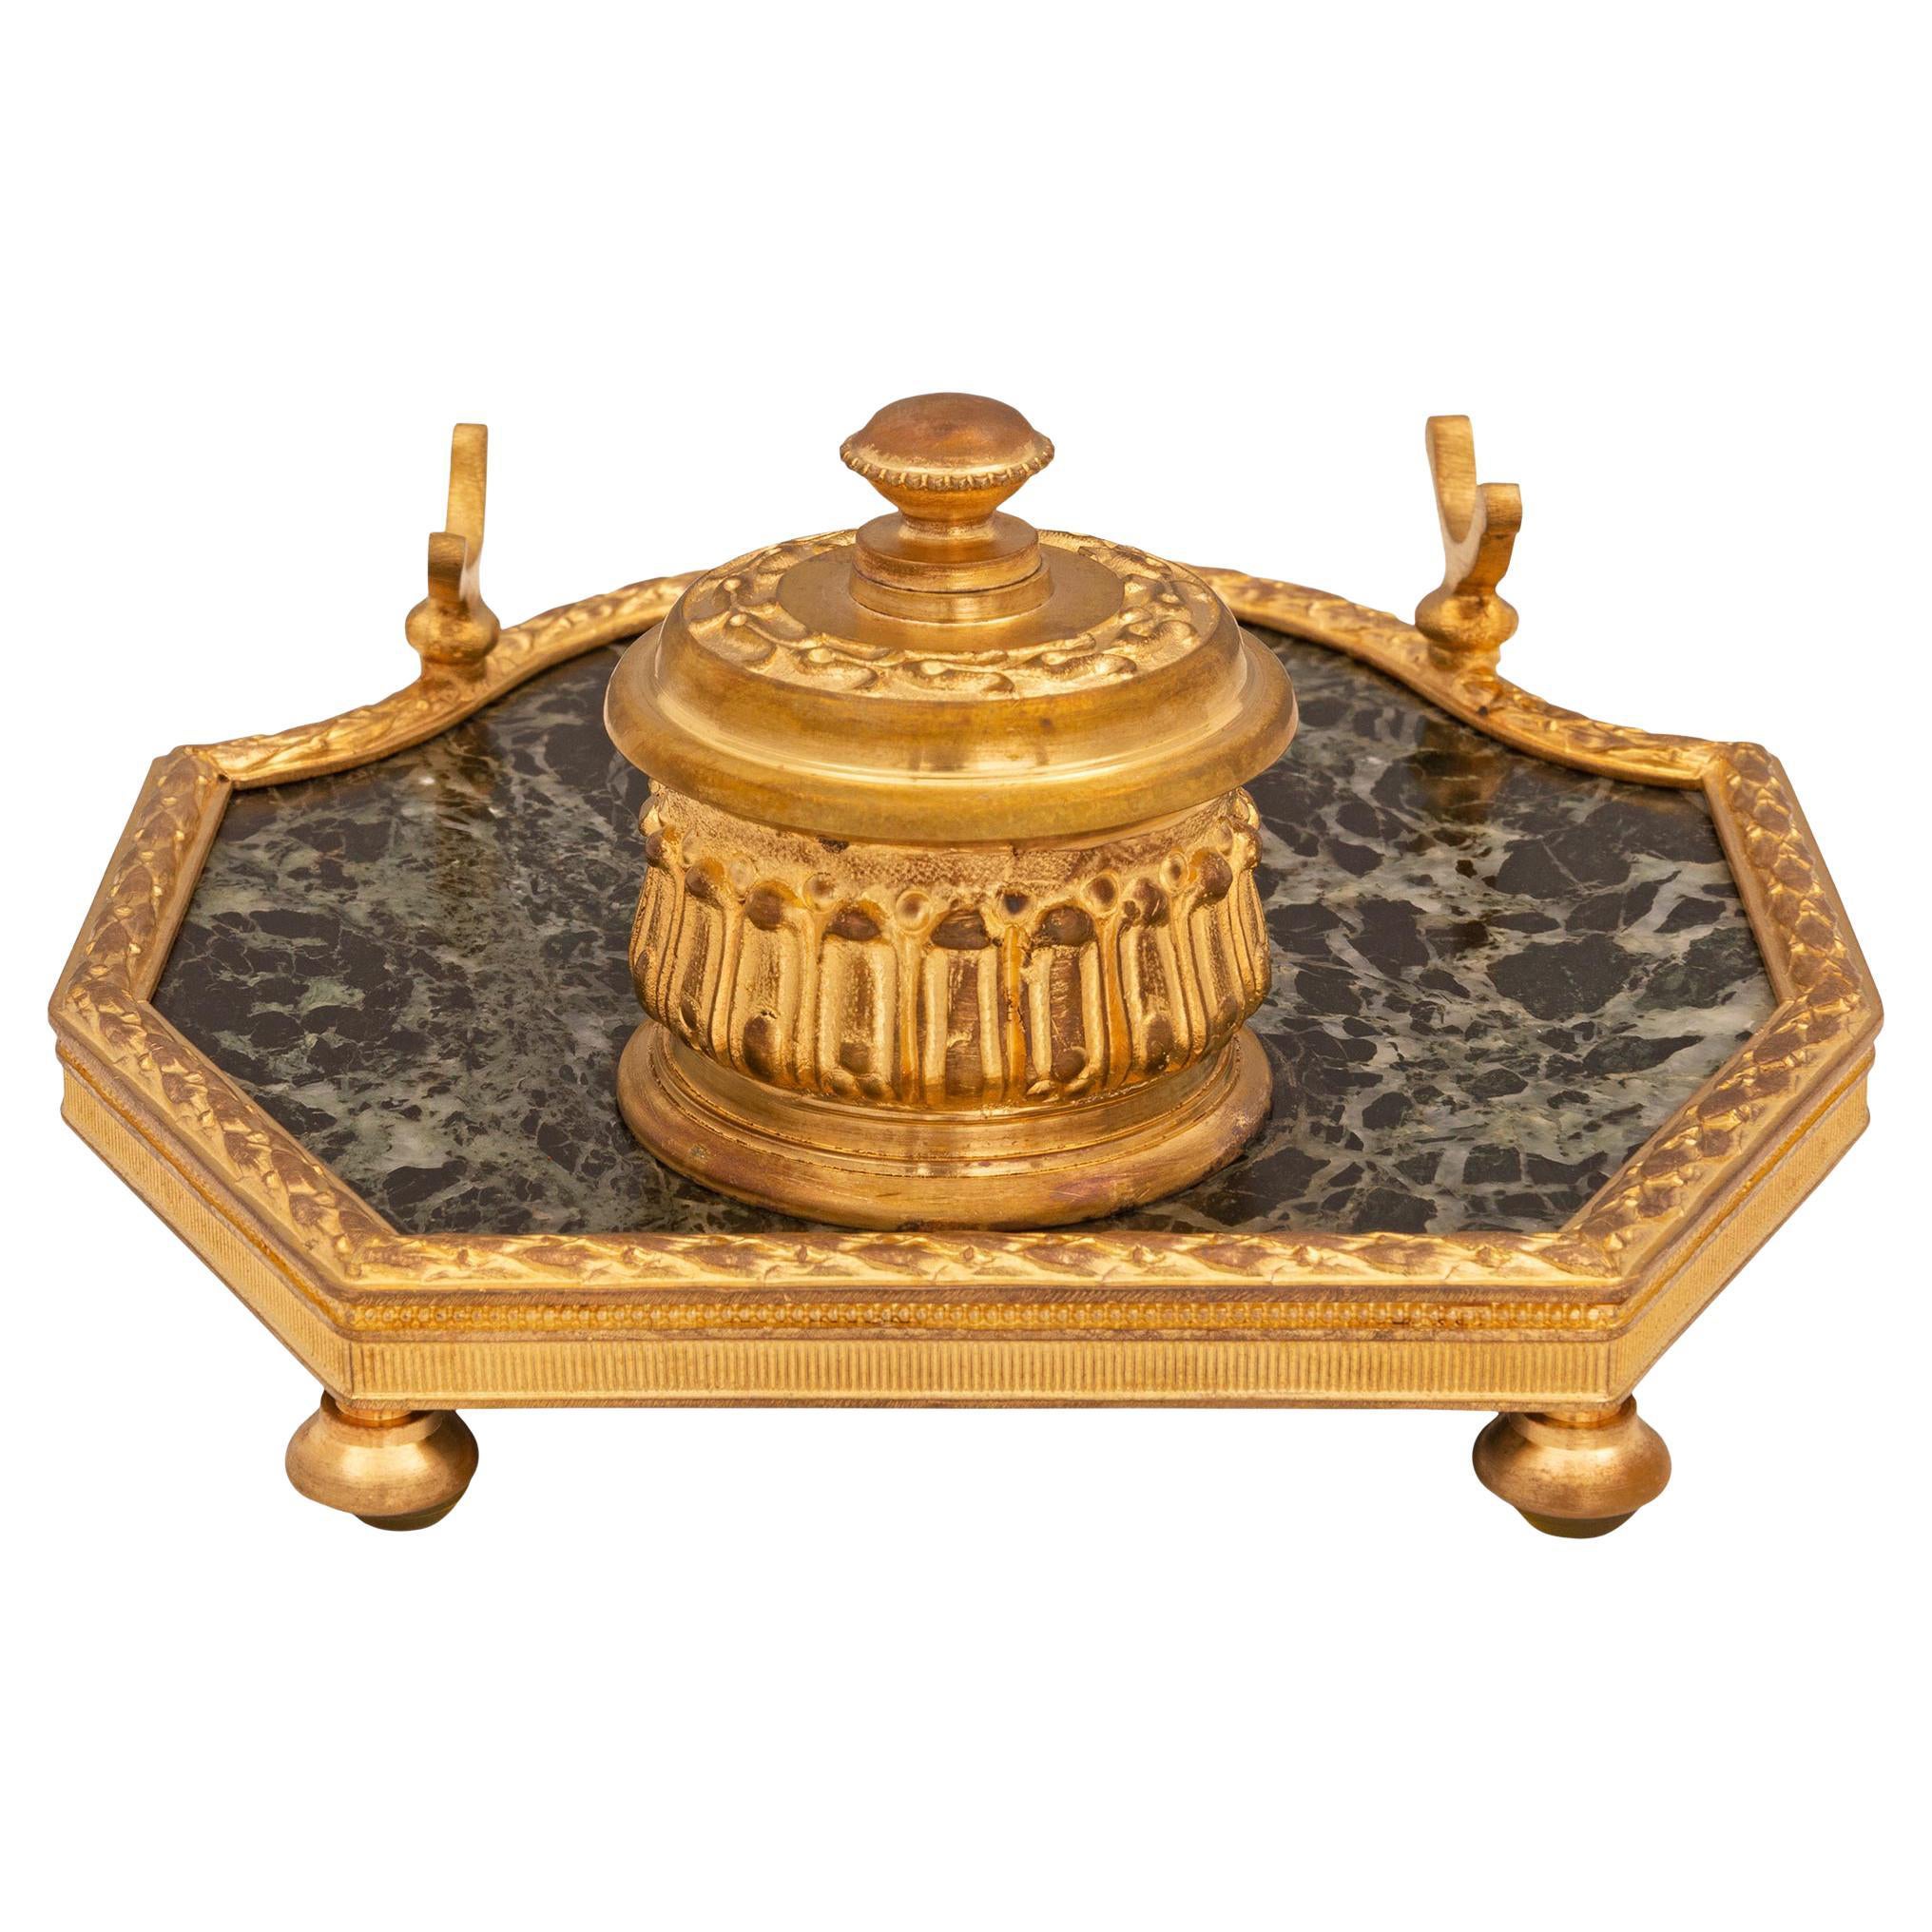 French Mid-19th Century Louis XVI Style Green Marble and Ormolu Mounted Inkwell For Sale